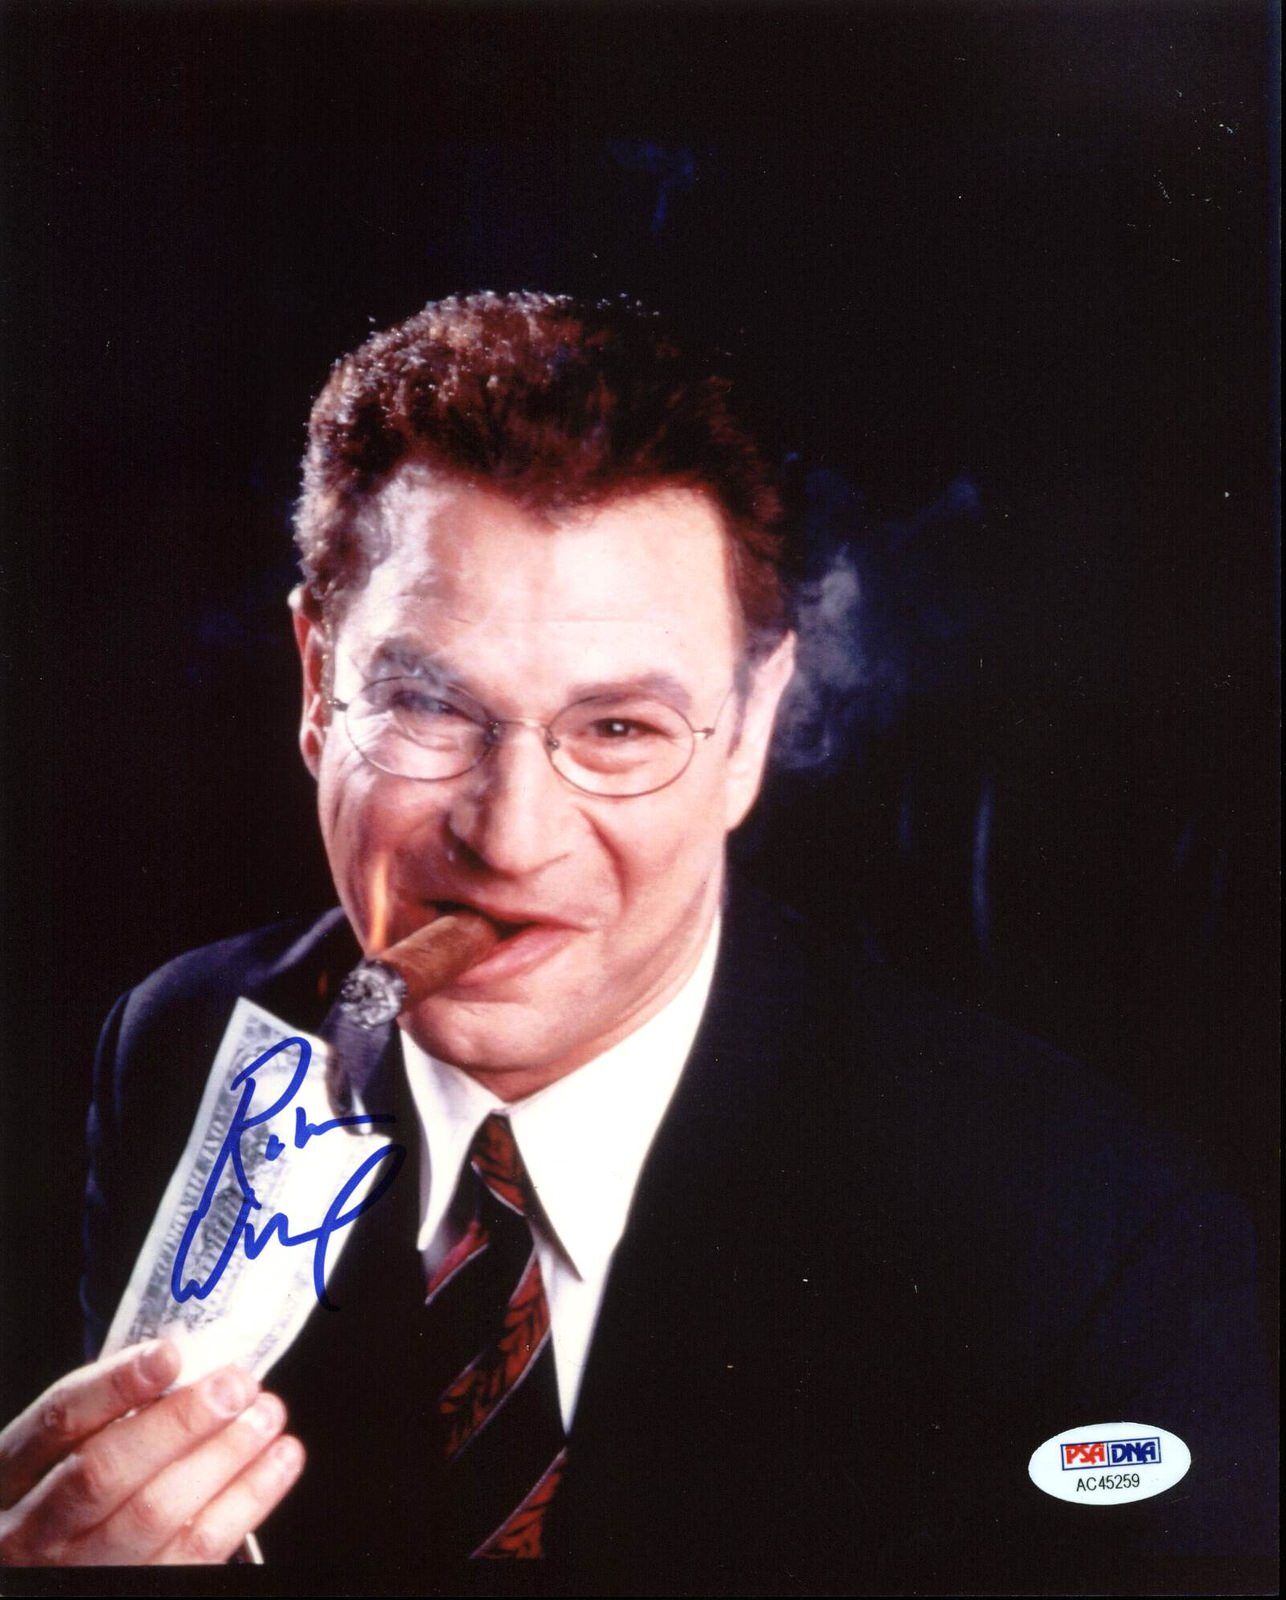 Robert Wuhl Arliss Authentic Signed 8X10 Photo Poster painting Autographed PSA/DNA #AC45259